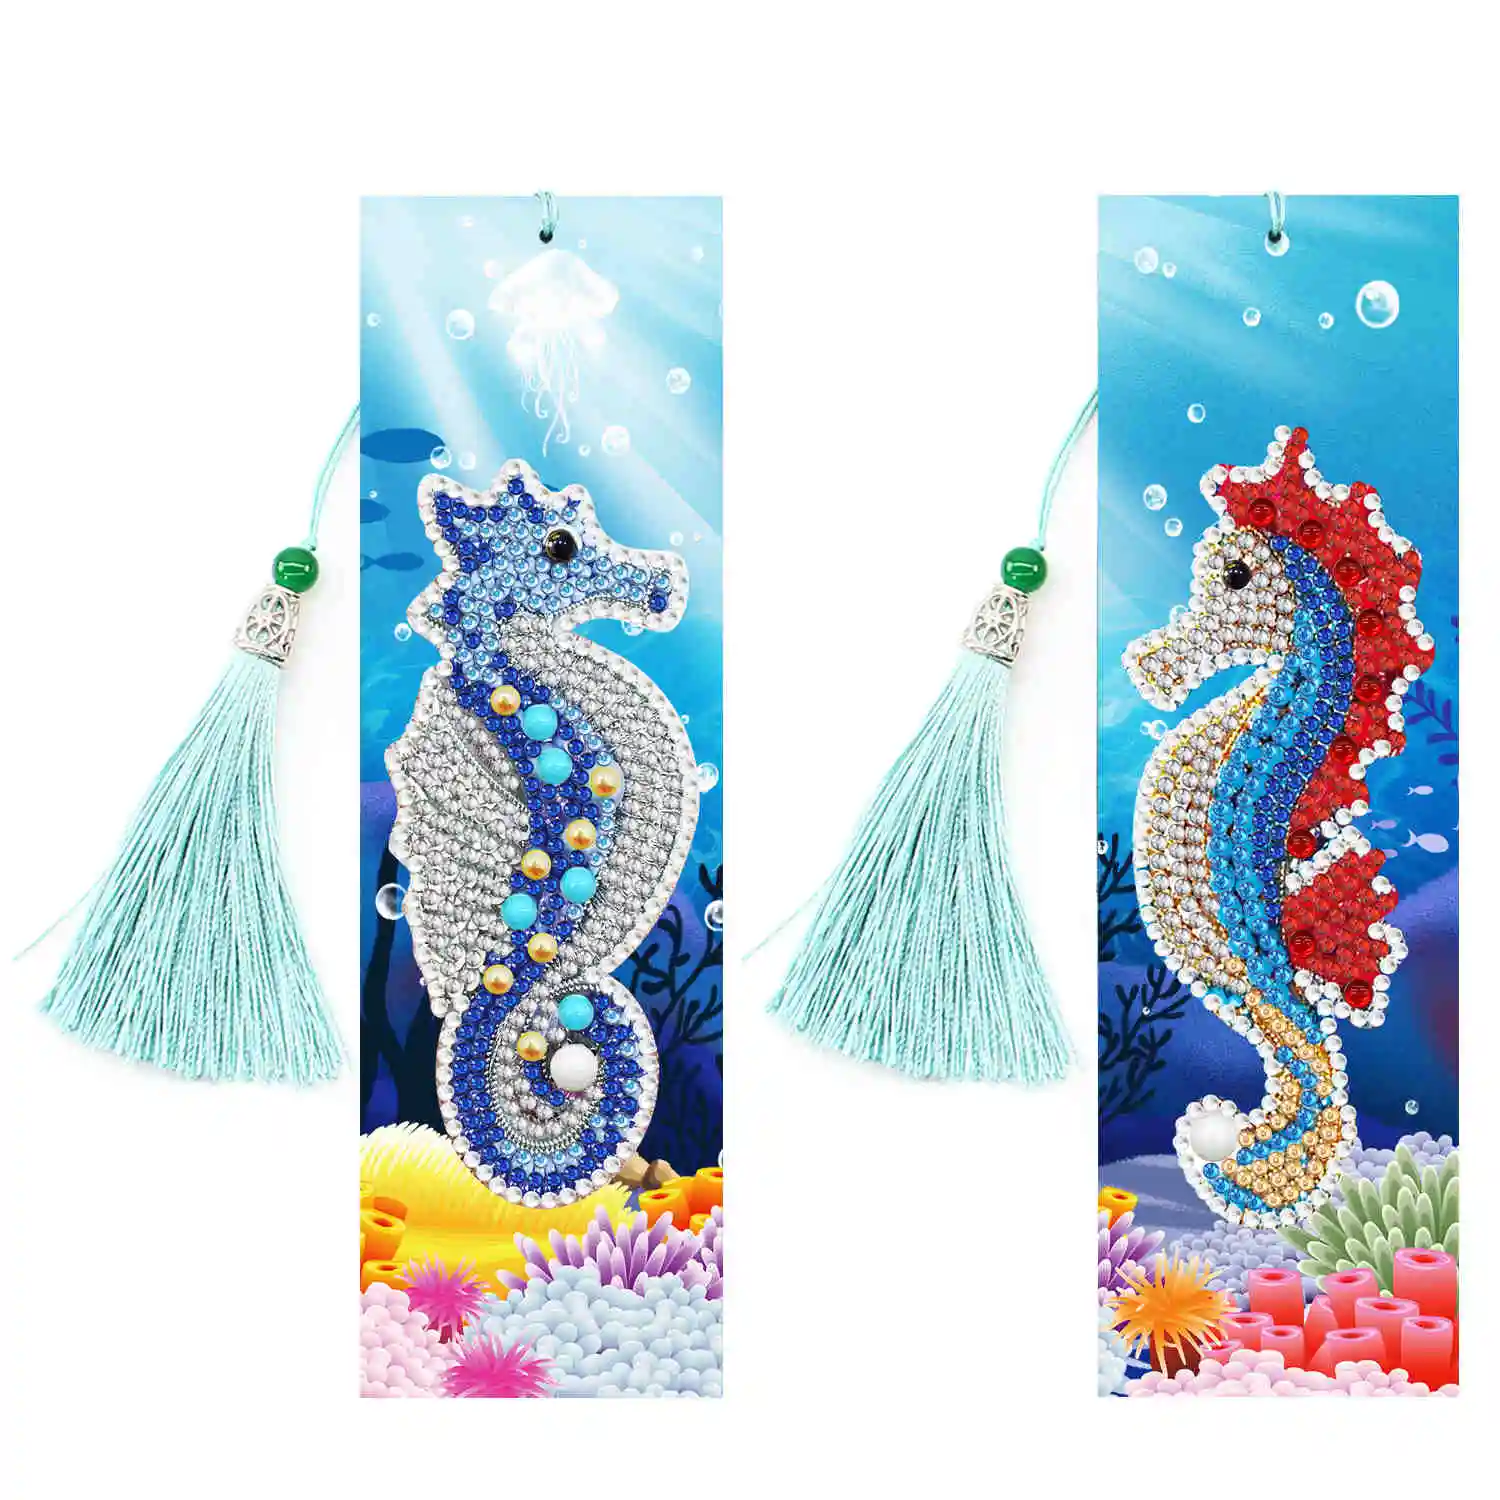 DIY Diamond Painting Bookmarks 5D Special Shaped Diamond Mosaic Leather Tassel Book Marks Diamond Embroidery Cross Stitch Gifts